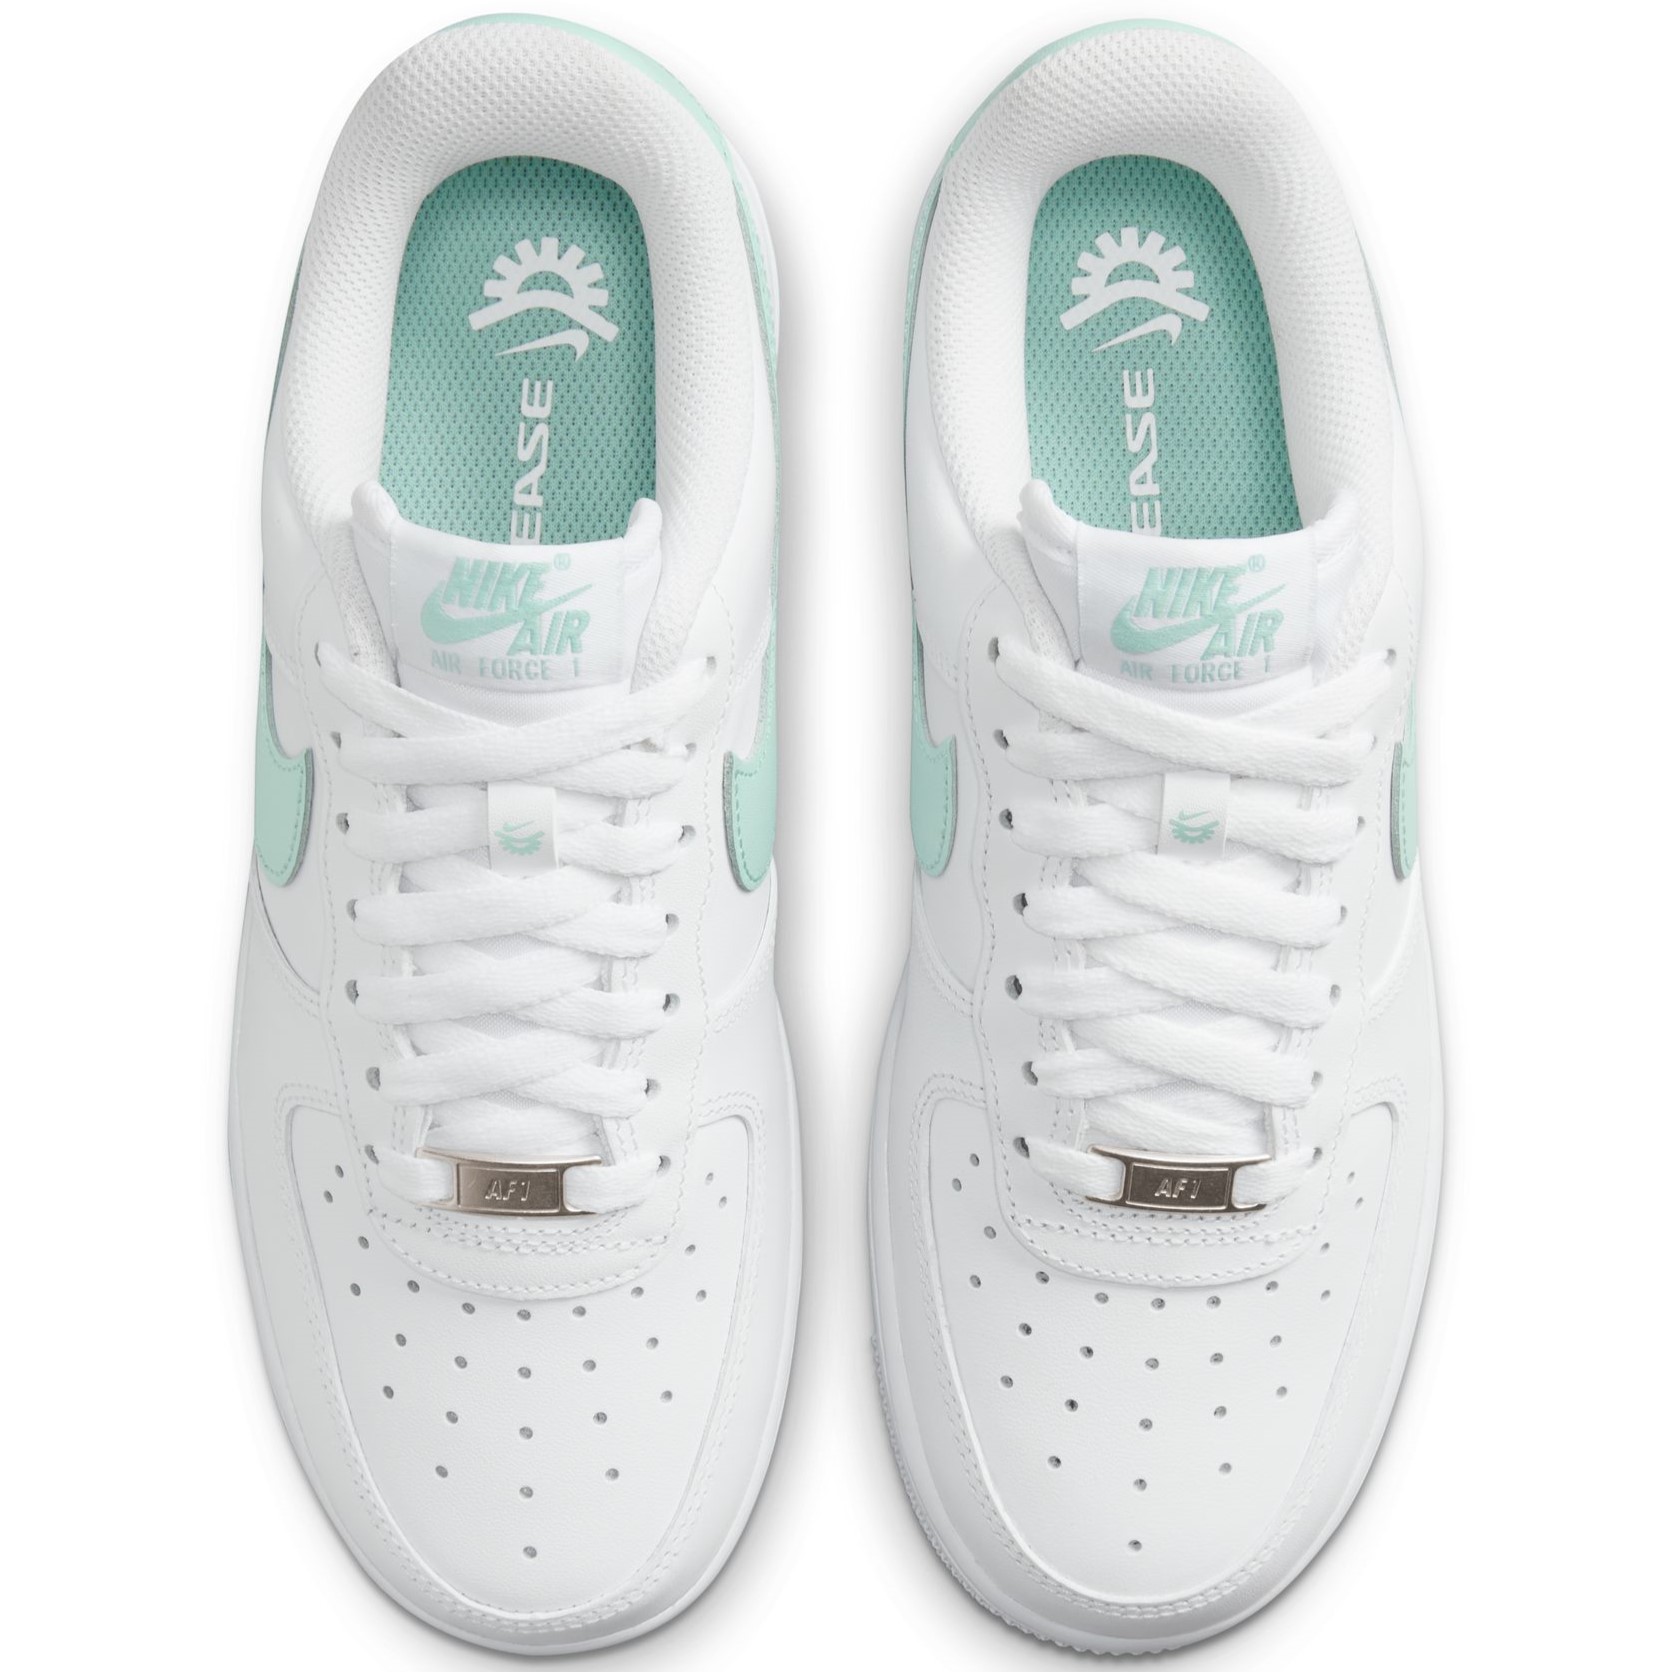 GIÀY NIKE NỮ AIR FORCE 1 07 EASYON WHITE ICE JADE WOMENS SHOES DX5883-101 6